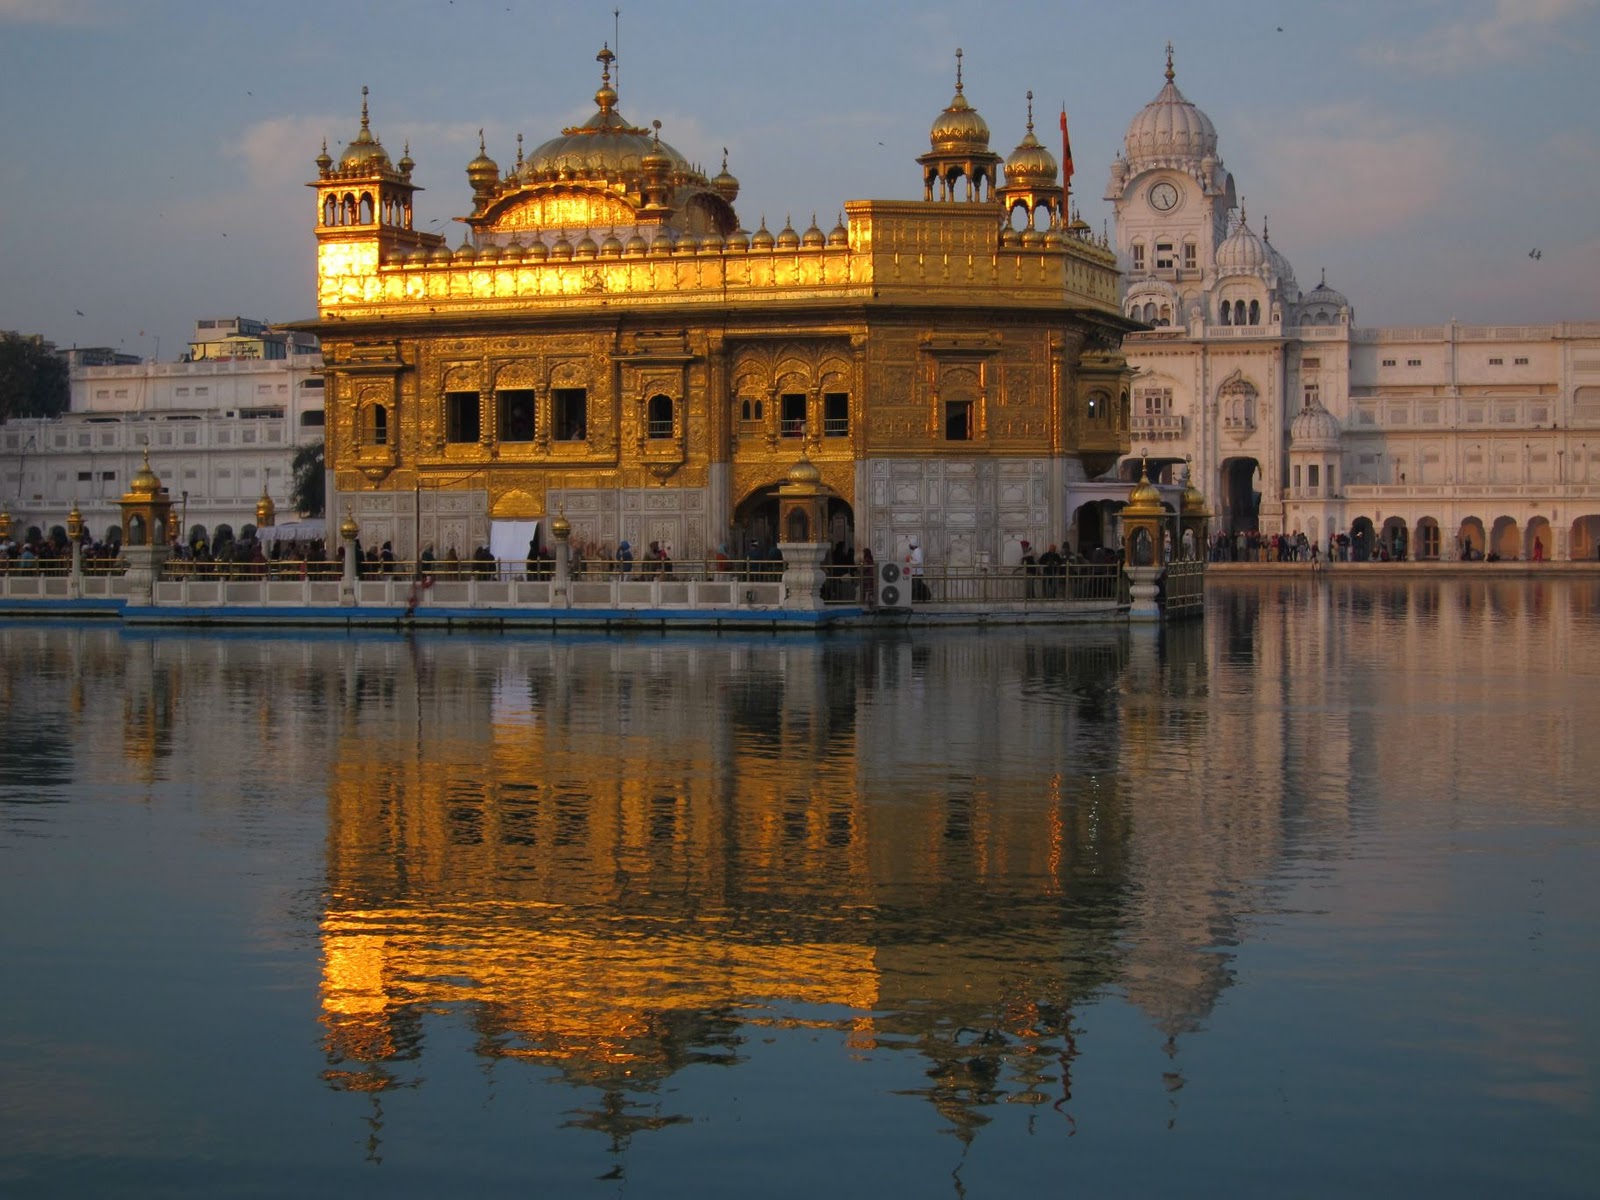 Worldtour 2011 - 2012: 27th January: Sunset on the Golden Temple